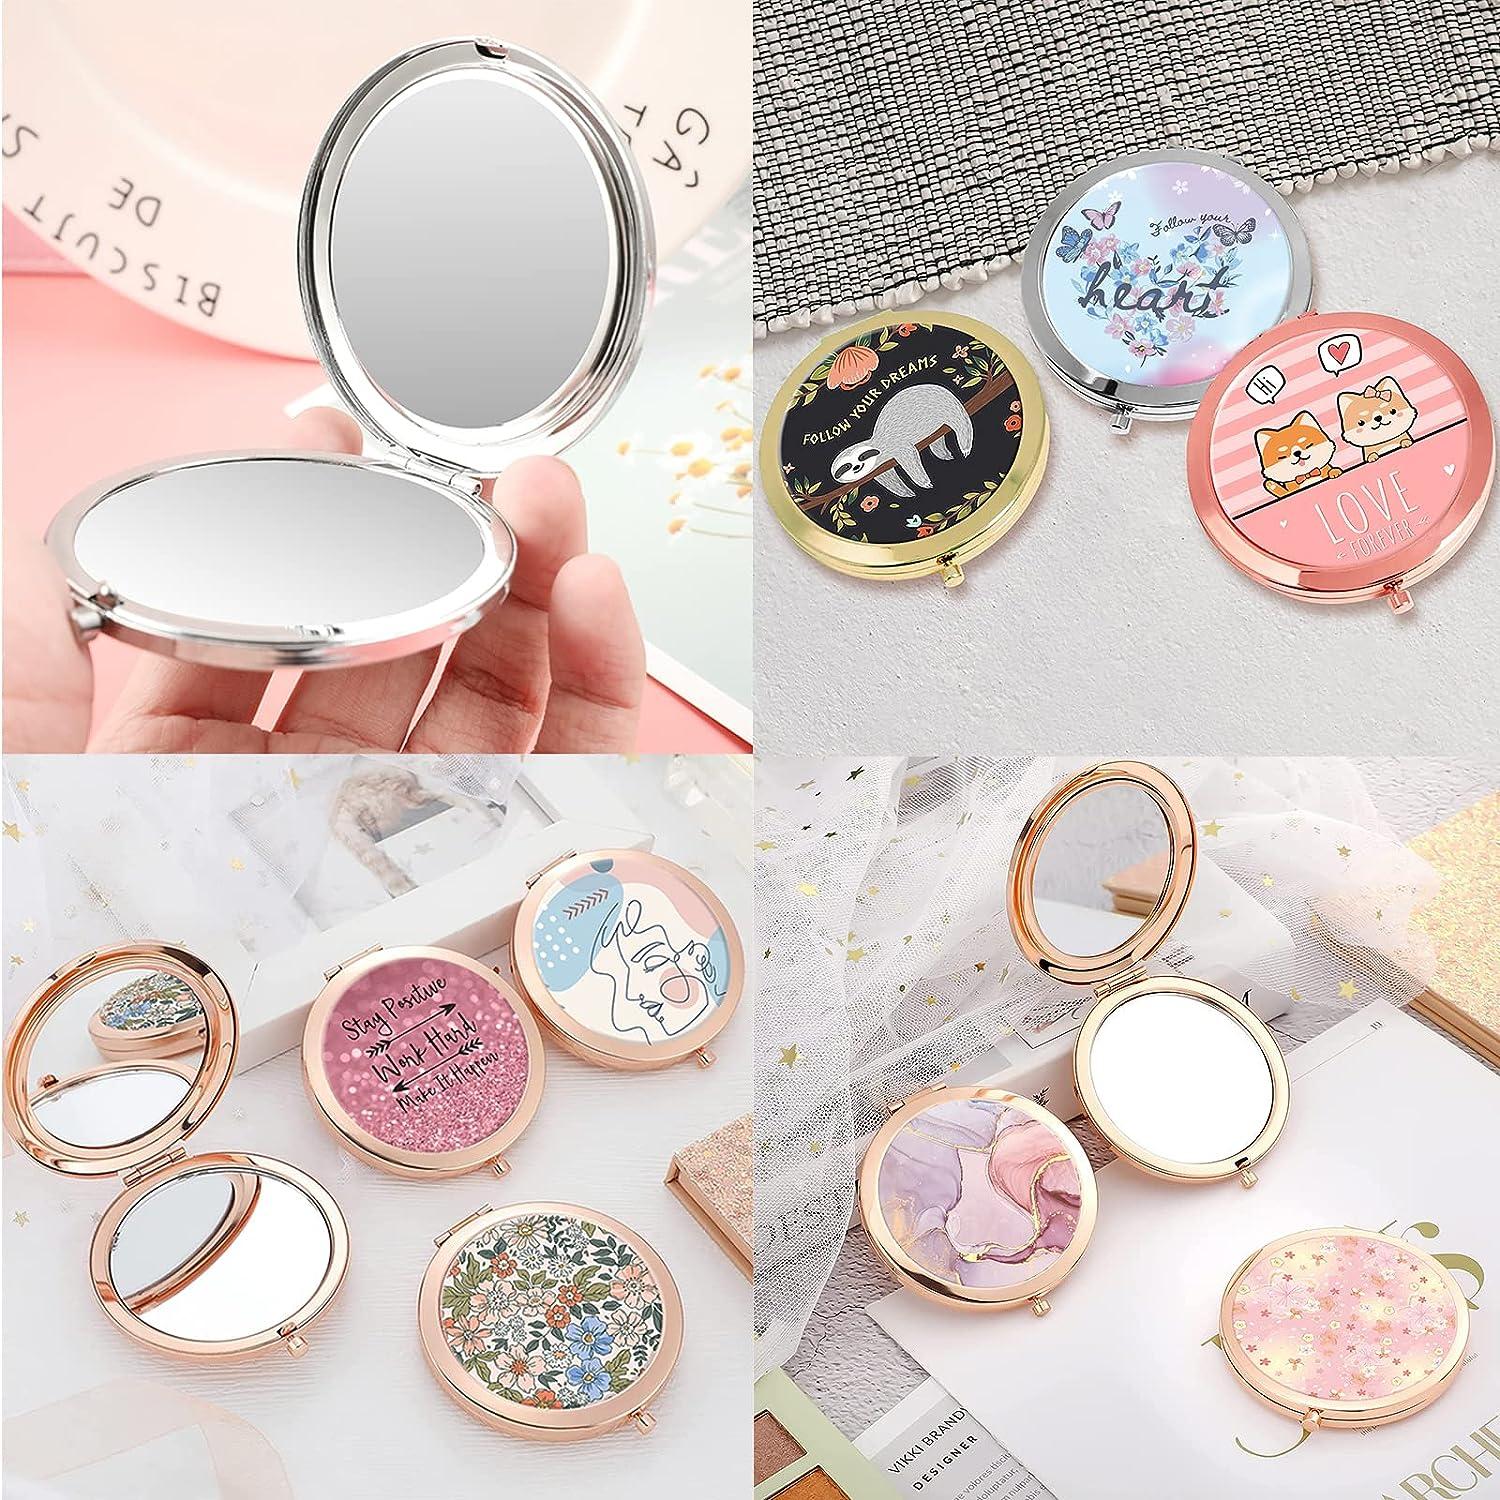 Hinged Compact Mirror Love and Beauty by Forever 21 Boston Bulldog